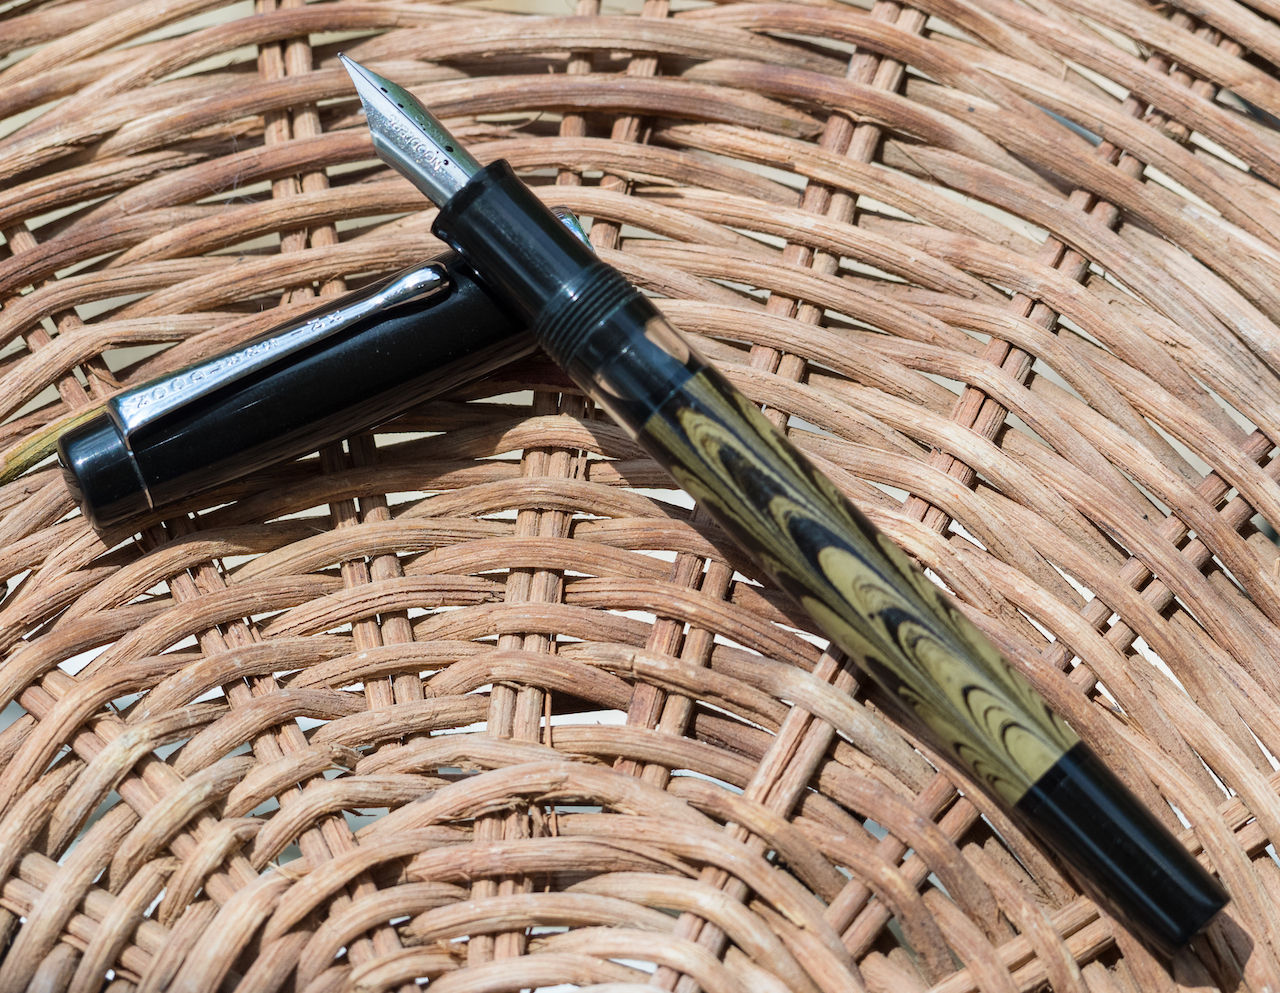 Vintage Find: Telescoping Dip Pen - The Well-Appointed Desk